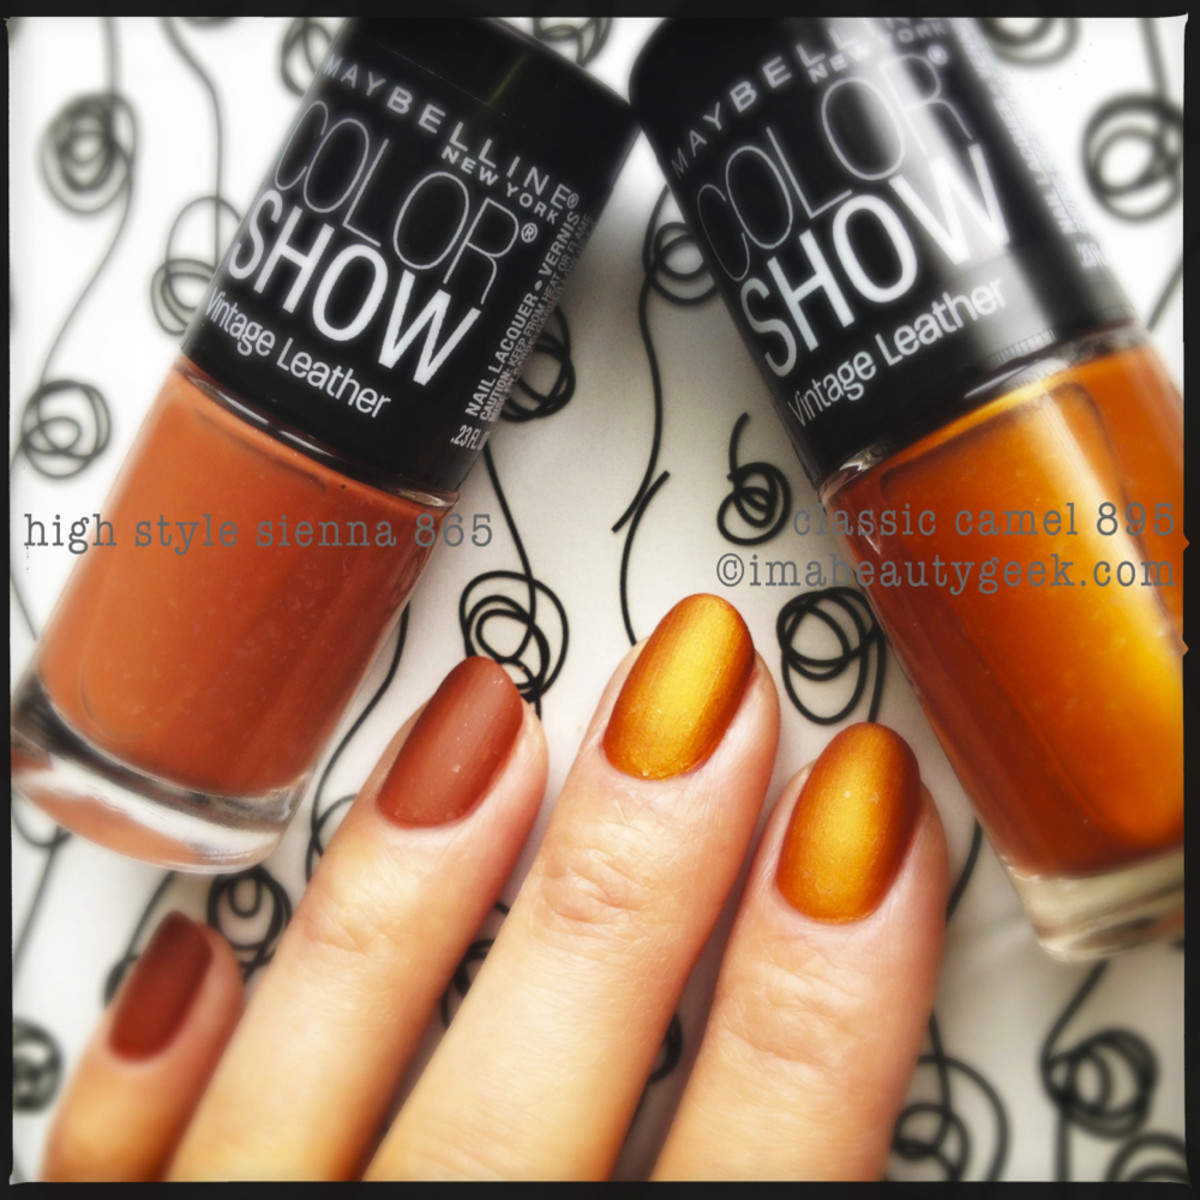 Maybelline High Style Sierra & Maybelline Classic Camel Vintage Leather Collection 2013